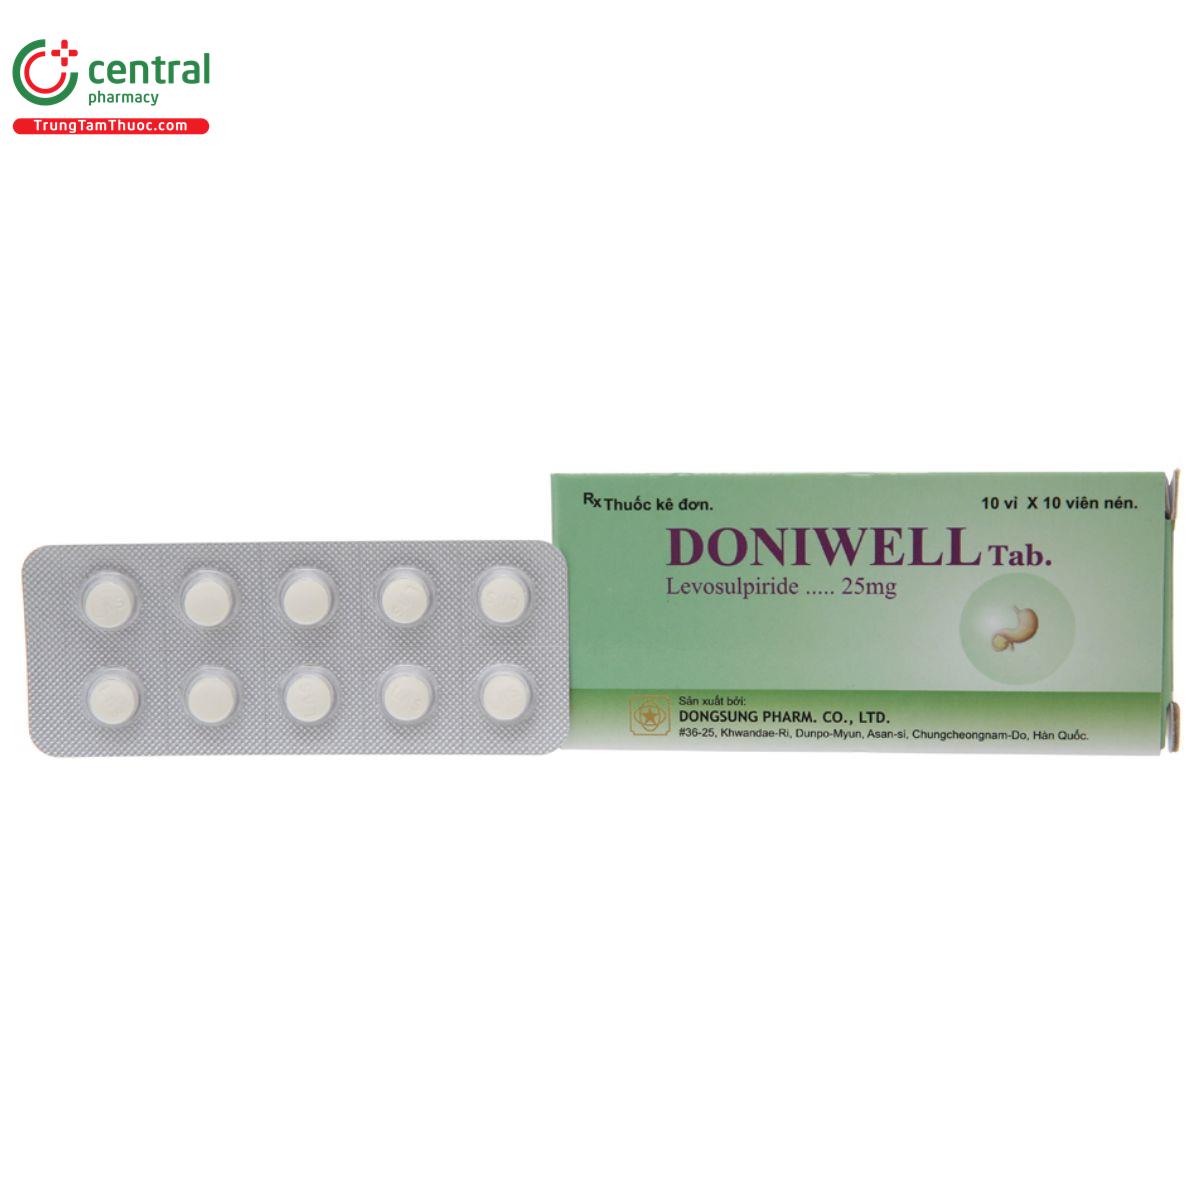 doniwell 6 C1174